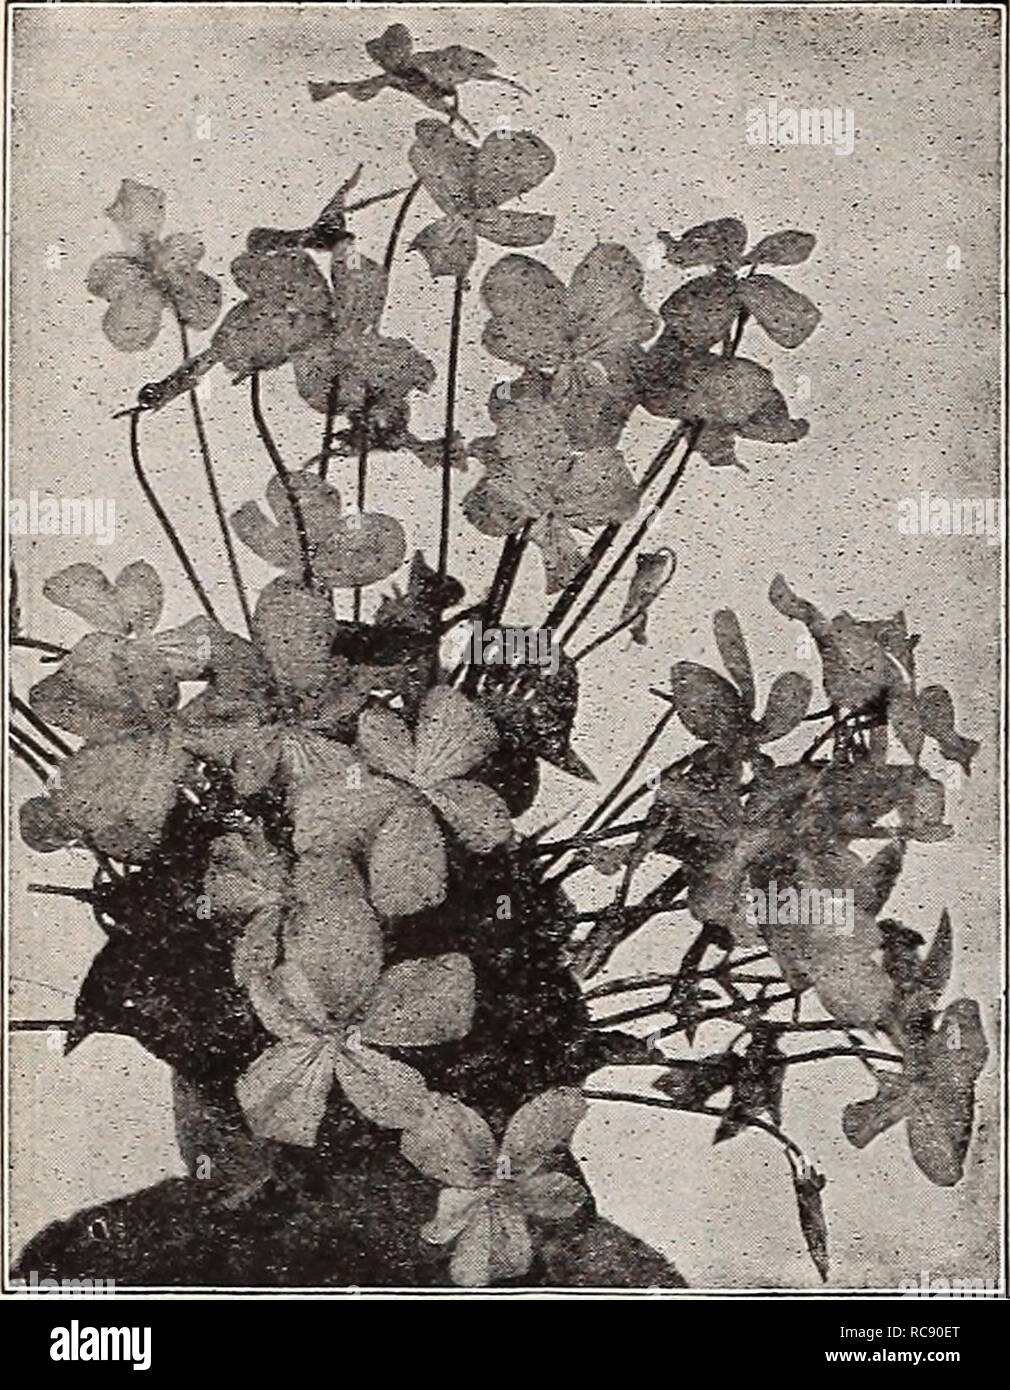 . Dreer's garden book 1917. Seeds Catalogs; Nursery stock Catalogs; Gardening Equipment and supplies Catalogs; Flowers Seeds Catalogs; Vegetables Seeds Catalogs; Fruit Seeds Catalogs. 244. Viola Cornuta Purpurea VIOLA CORNUTA PURPU REA, OR G. WERMIG. A variety of the tufted Pansy, forming clumps that are a sheet of bloom the entire season, and a most attractive subject for the border; the flowers, which in general appearance closely resemble the Princess of Wales Violet, make it a splendid substitute for the latter during the summer months when these are not to be had. (See cut.) 15 cts. each; Stock Photo